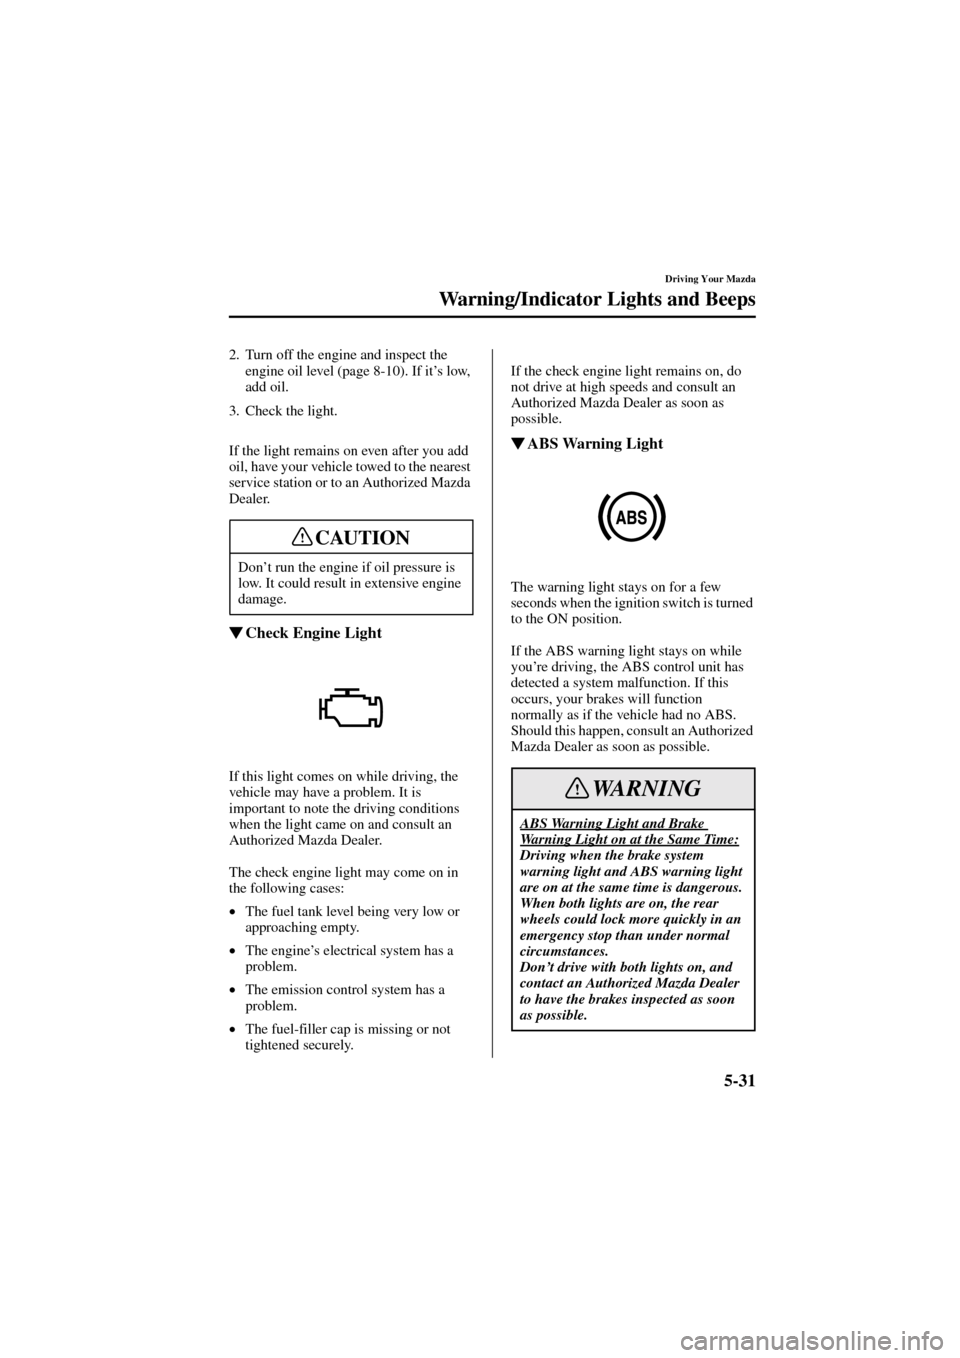 MAZDA MODEL 6 2004  Owners Manual (in English) 5-31
Driving Your Mazda
Warning/Indicator Lights and Beeps
Form No. 8R29-EA-02I
2. Turn off the engine and inspect the 
engine oil level (page 8-10). If it’s low, 
add oil.
3. Check the light.
If th